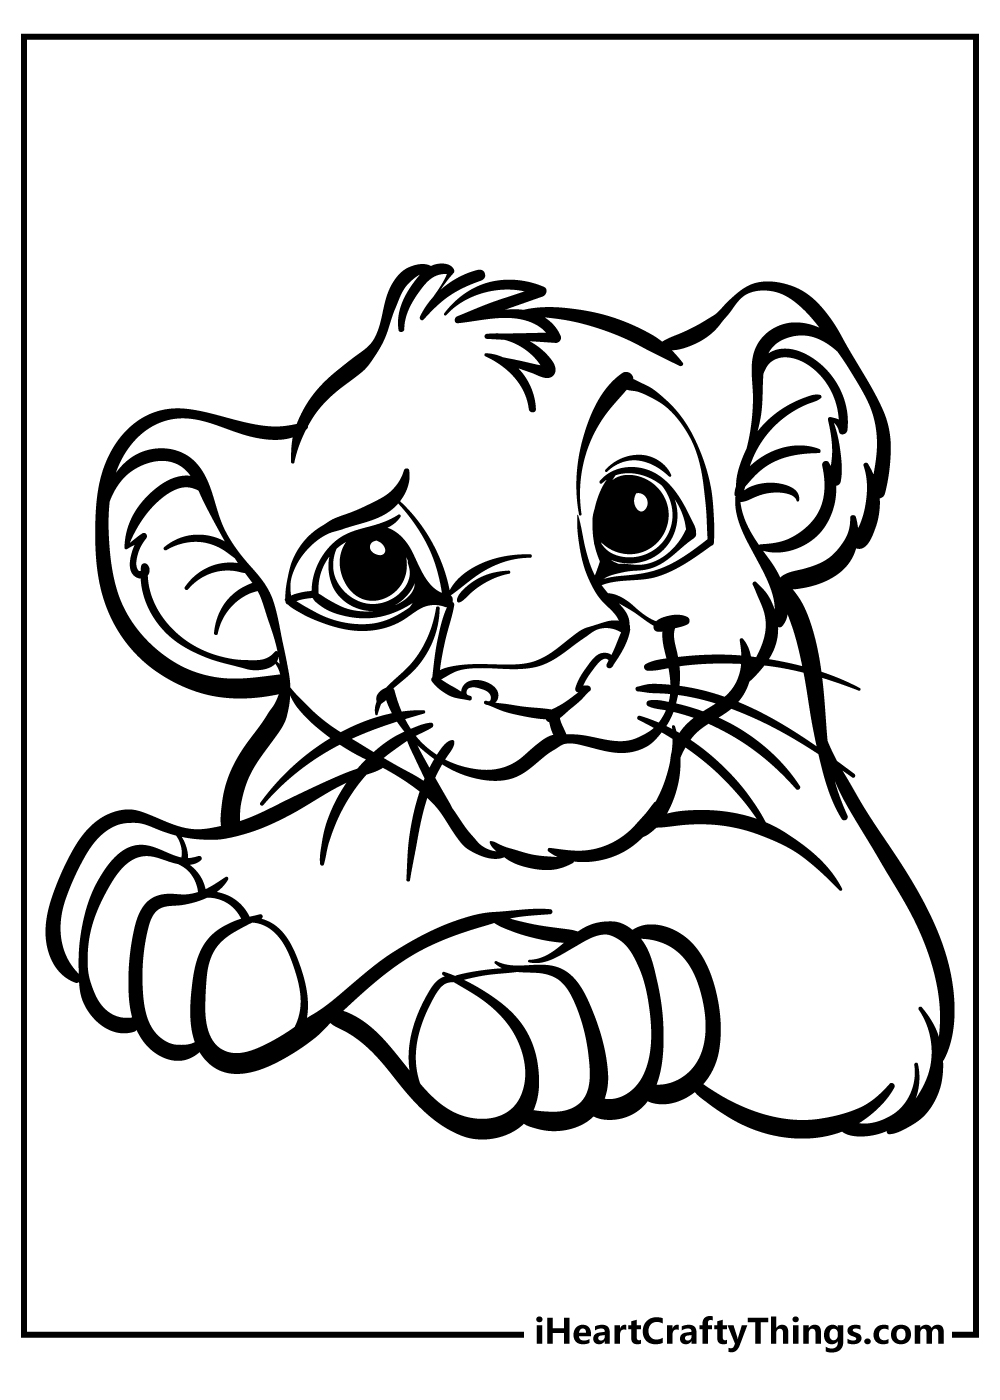 Lion King Coloring Book for adults free download